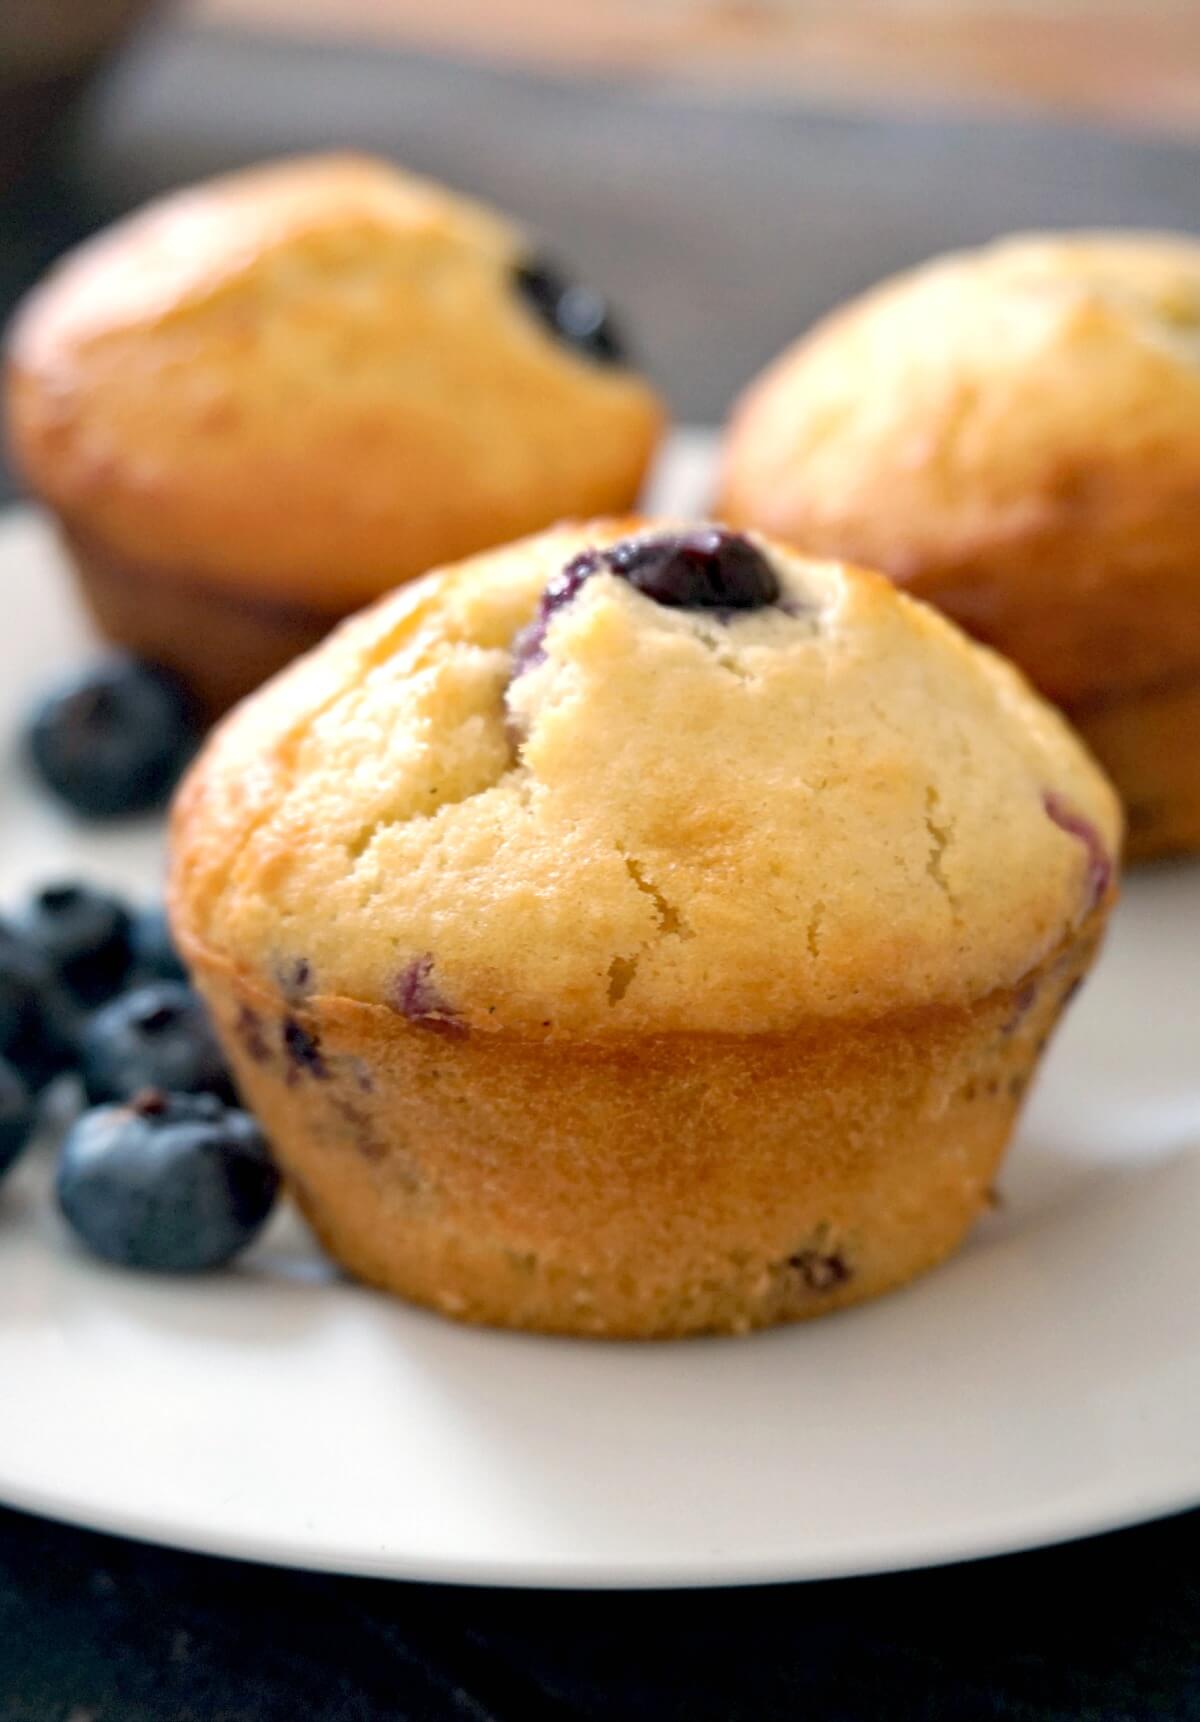 A muffin with 2 others in the background and blueberries around.